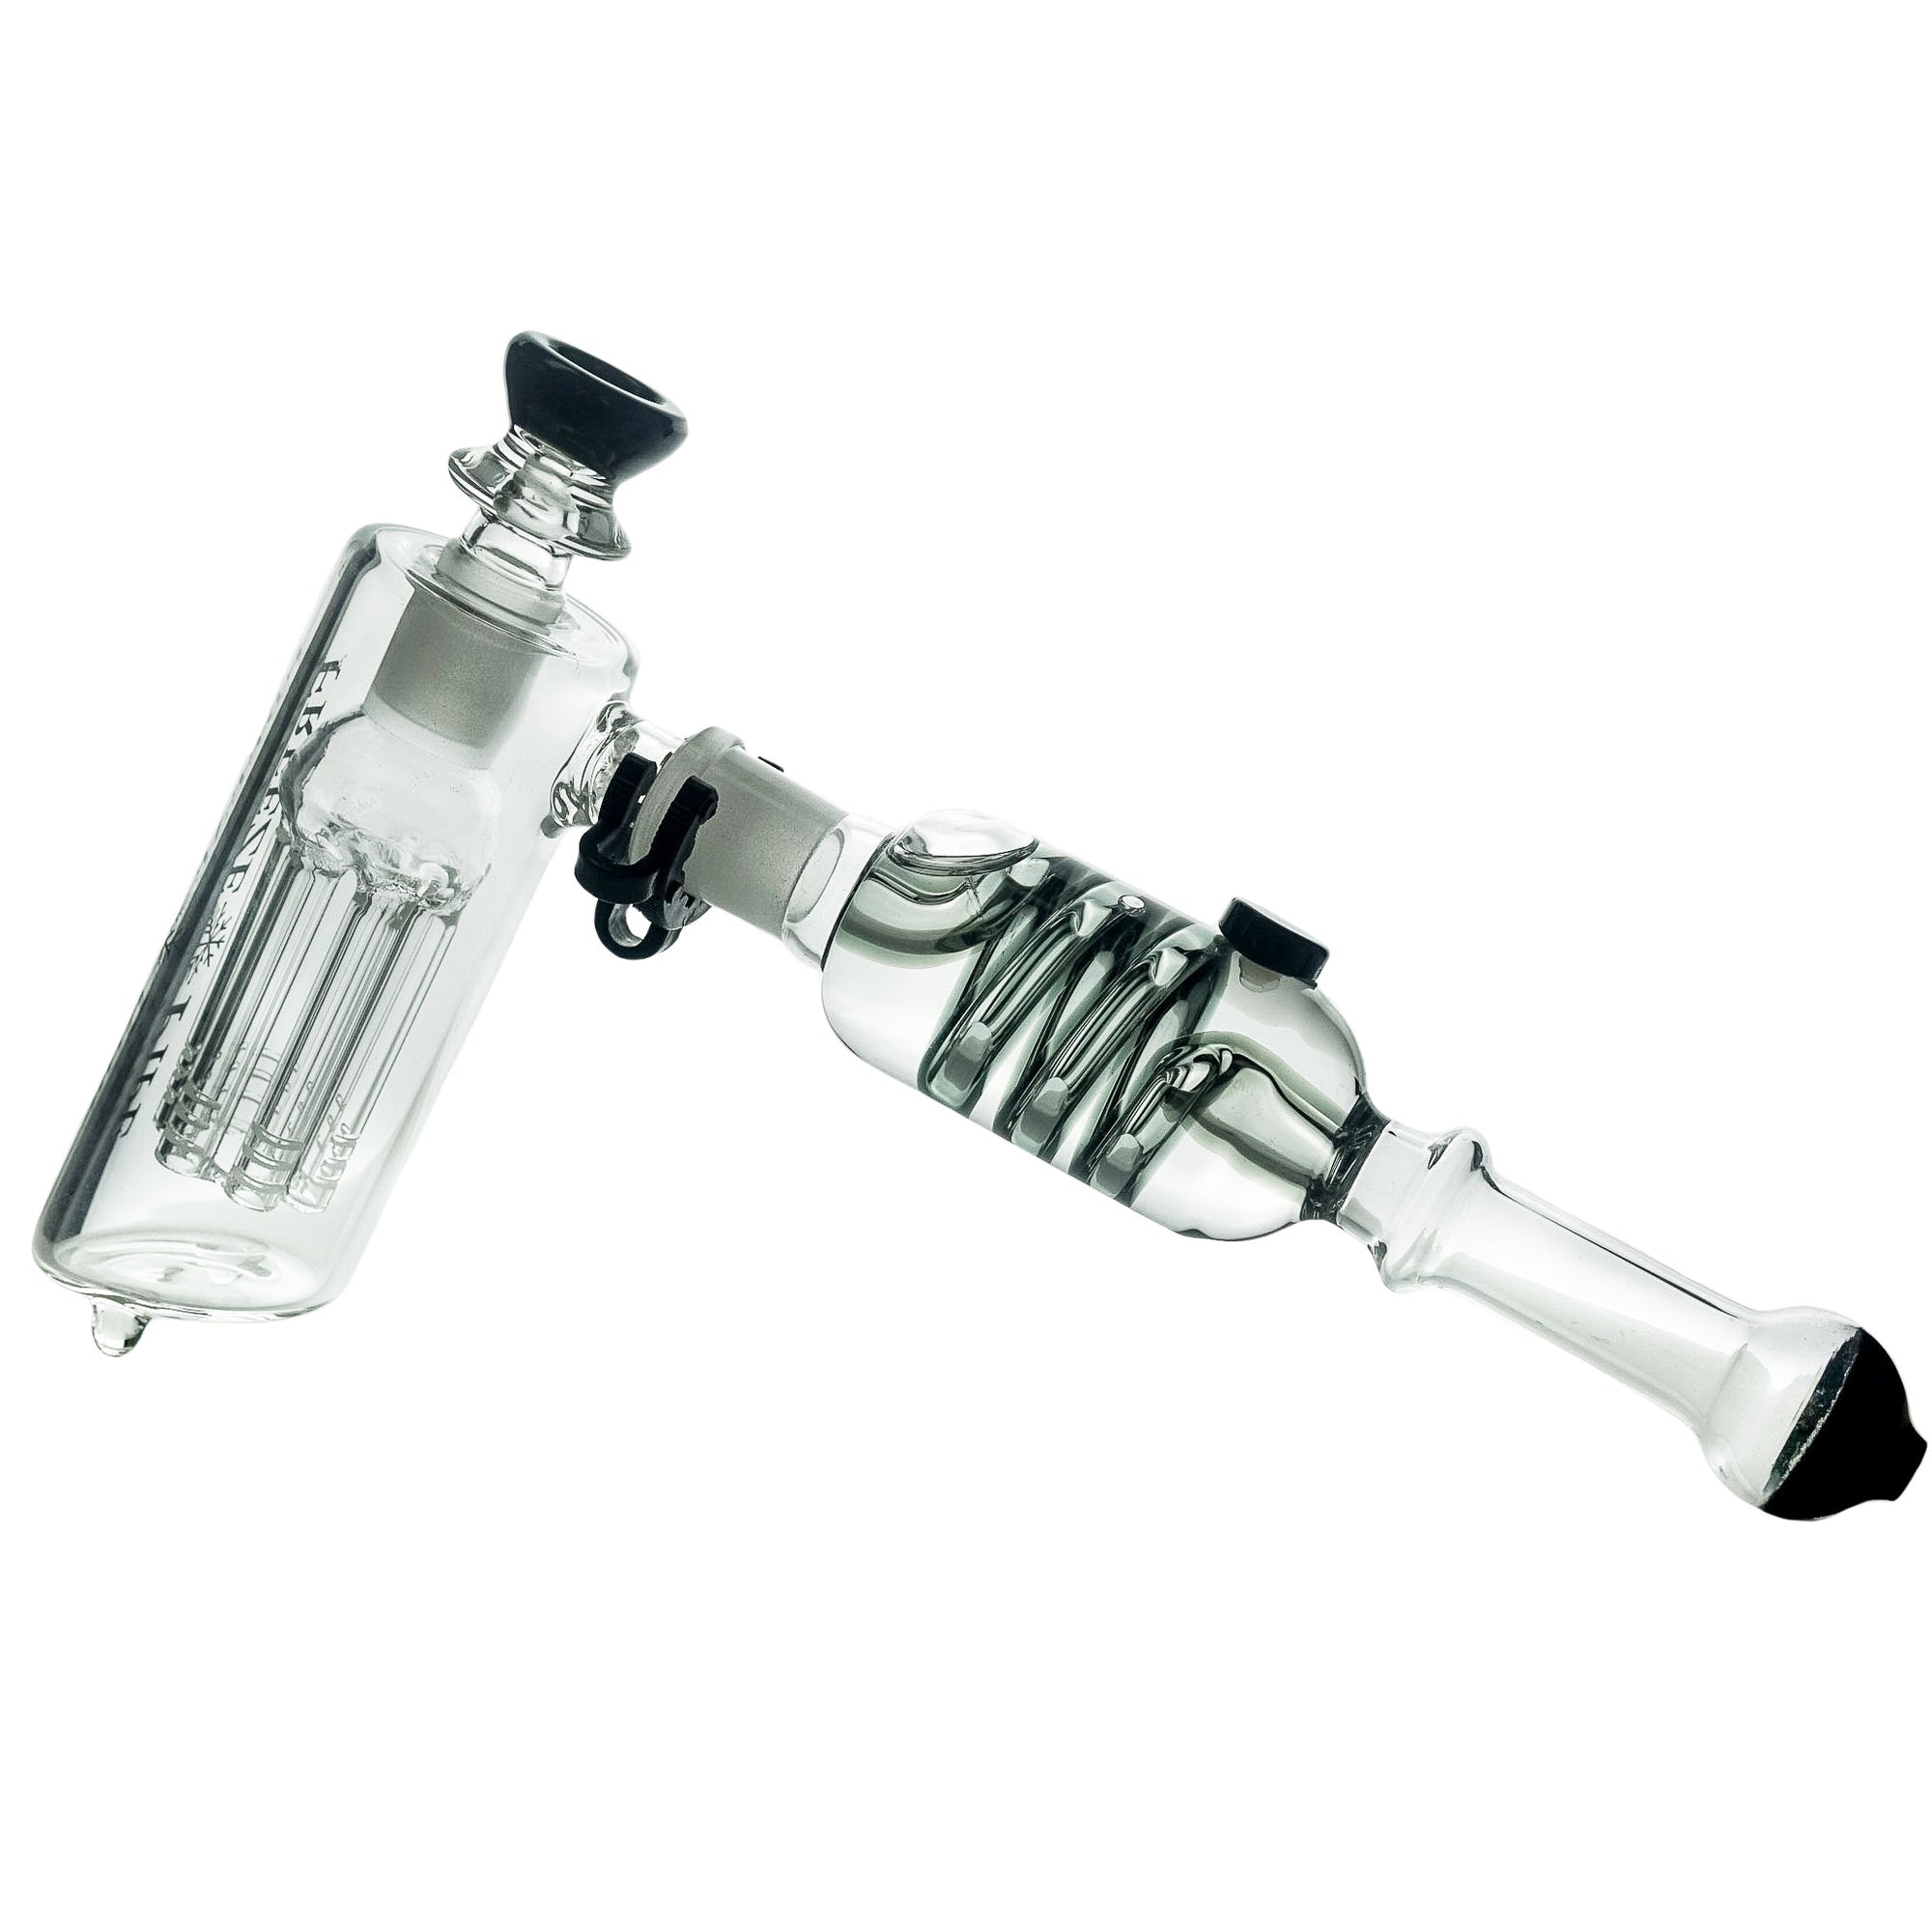 Freeze Pipe Bubbler (ONLINE ONLY)